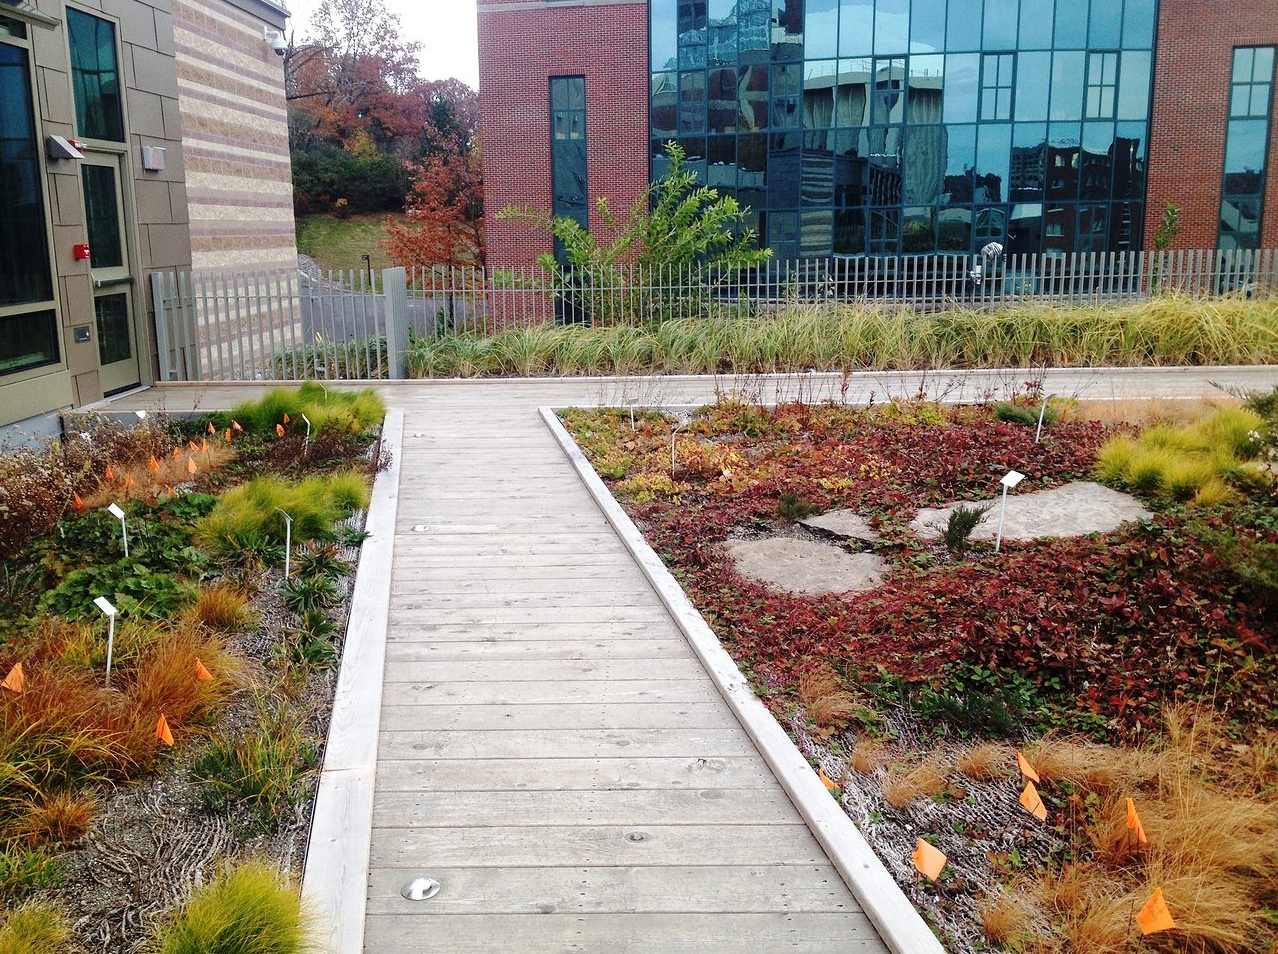 Image depicts early stages of green roof growth. Mixture of plants, featuring a variety of colors, interspersed with research flags